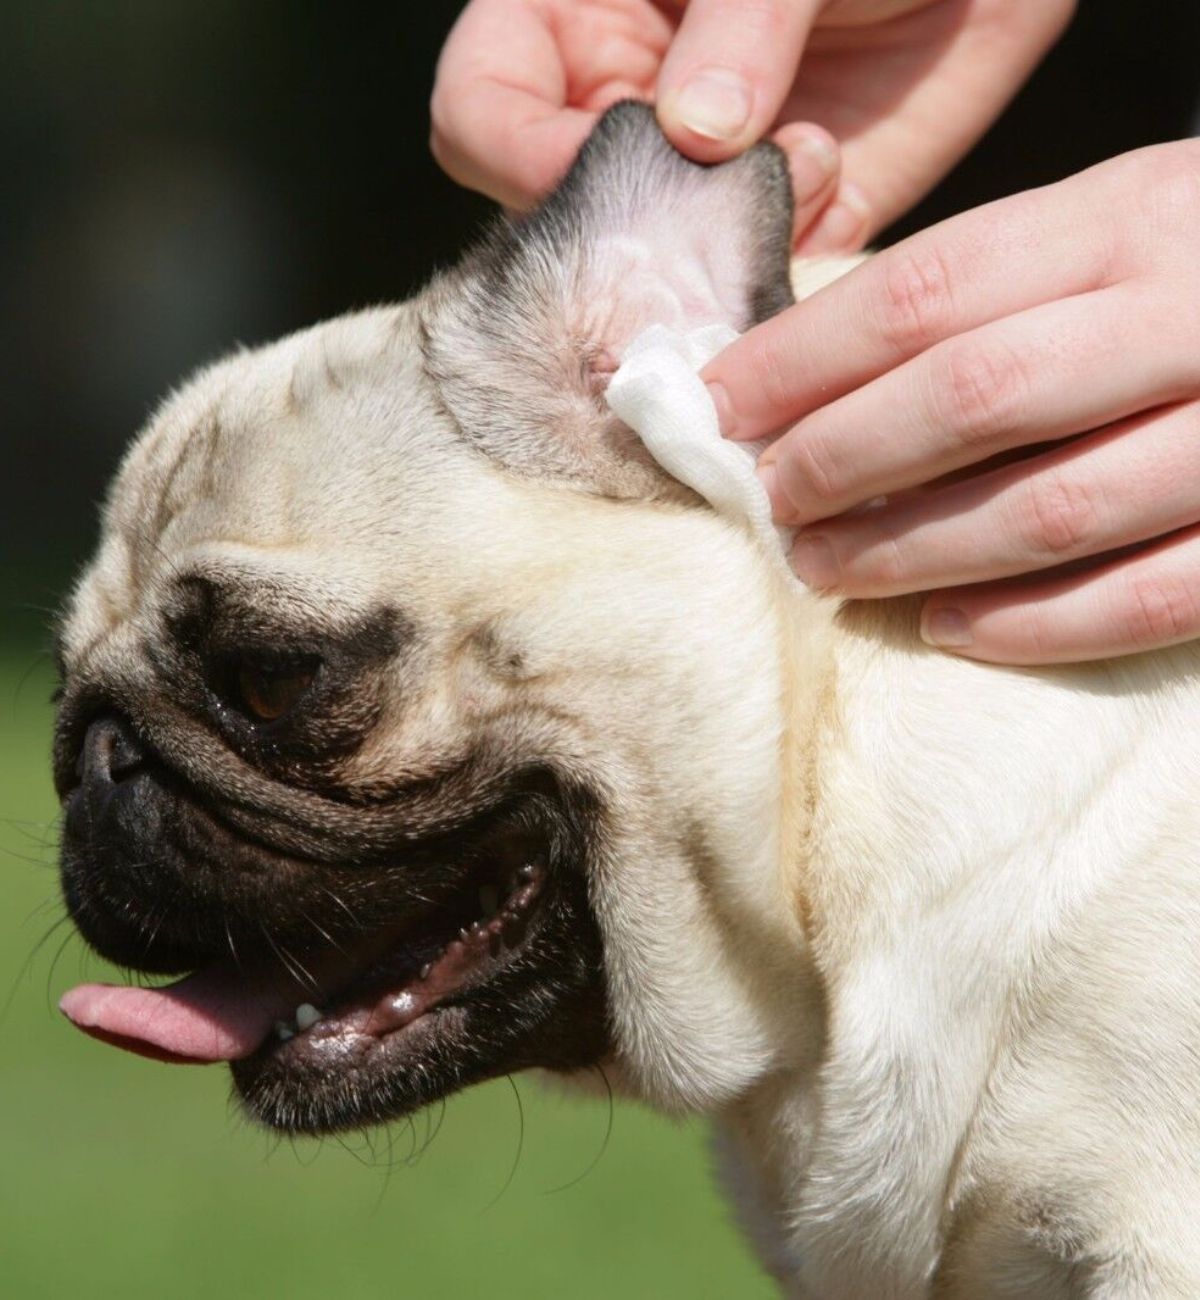 How to treat dog swollen ear flap? Hickory Food